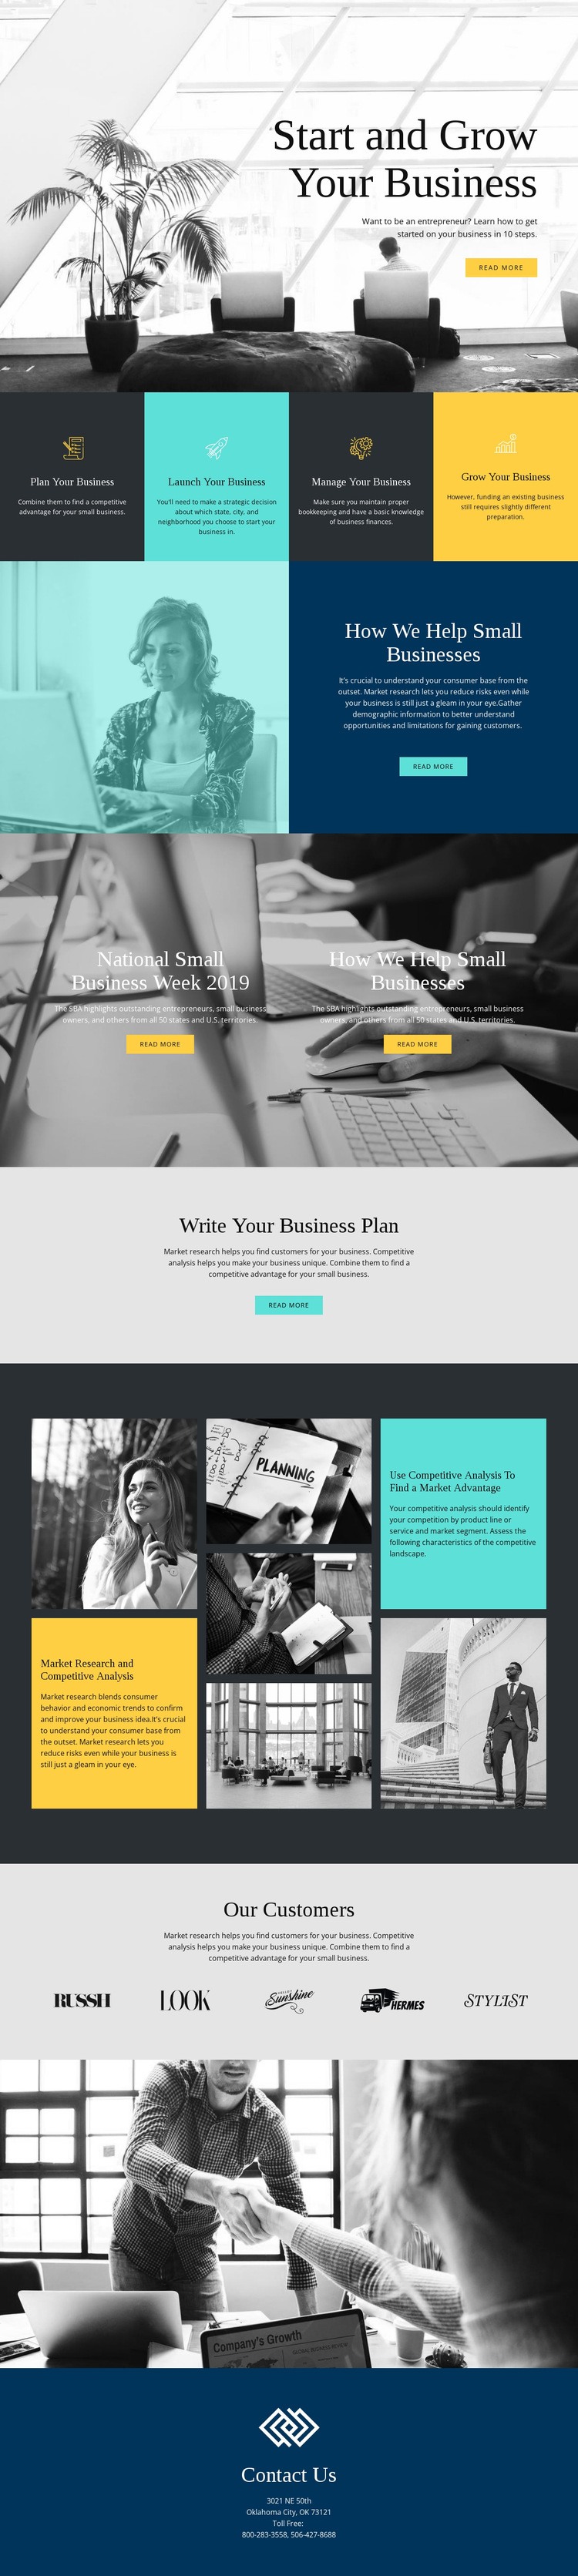 Start and grow your business eCommerce Template